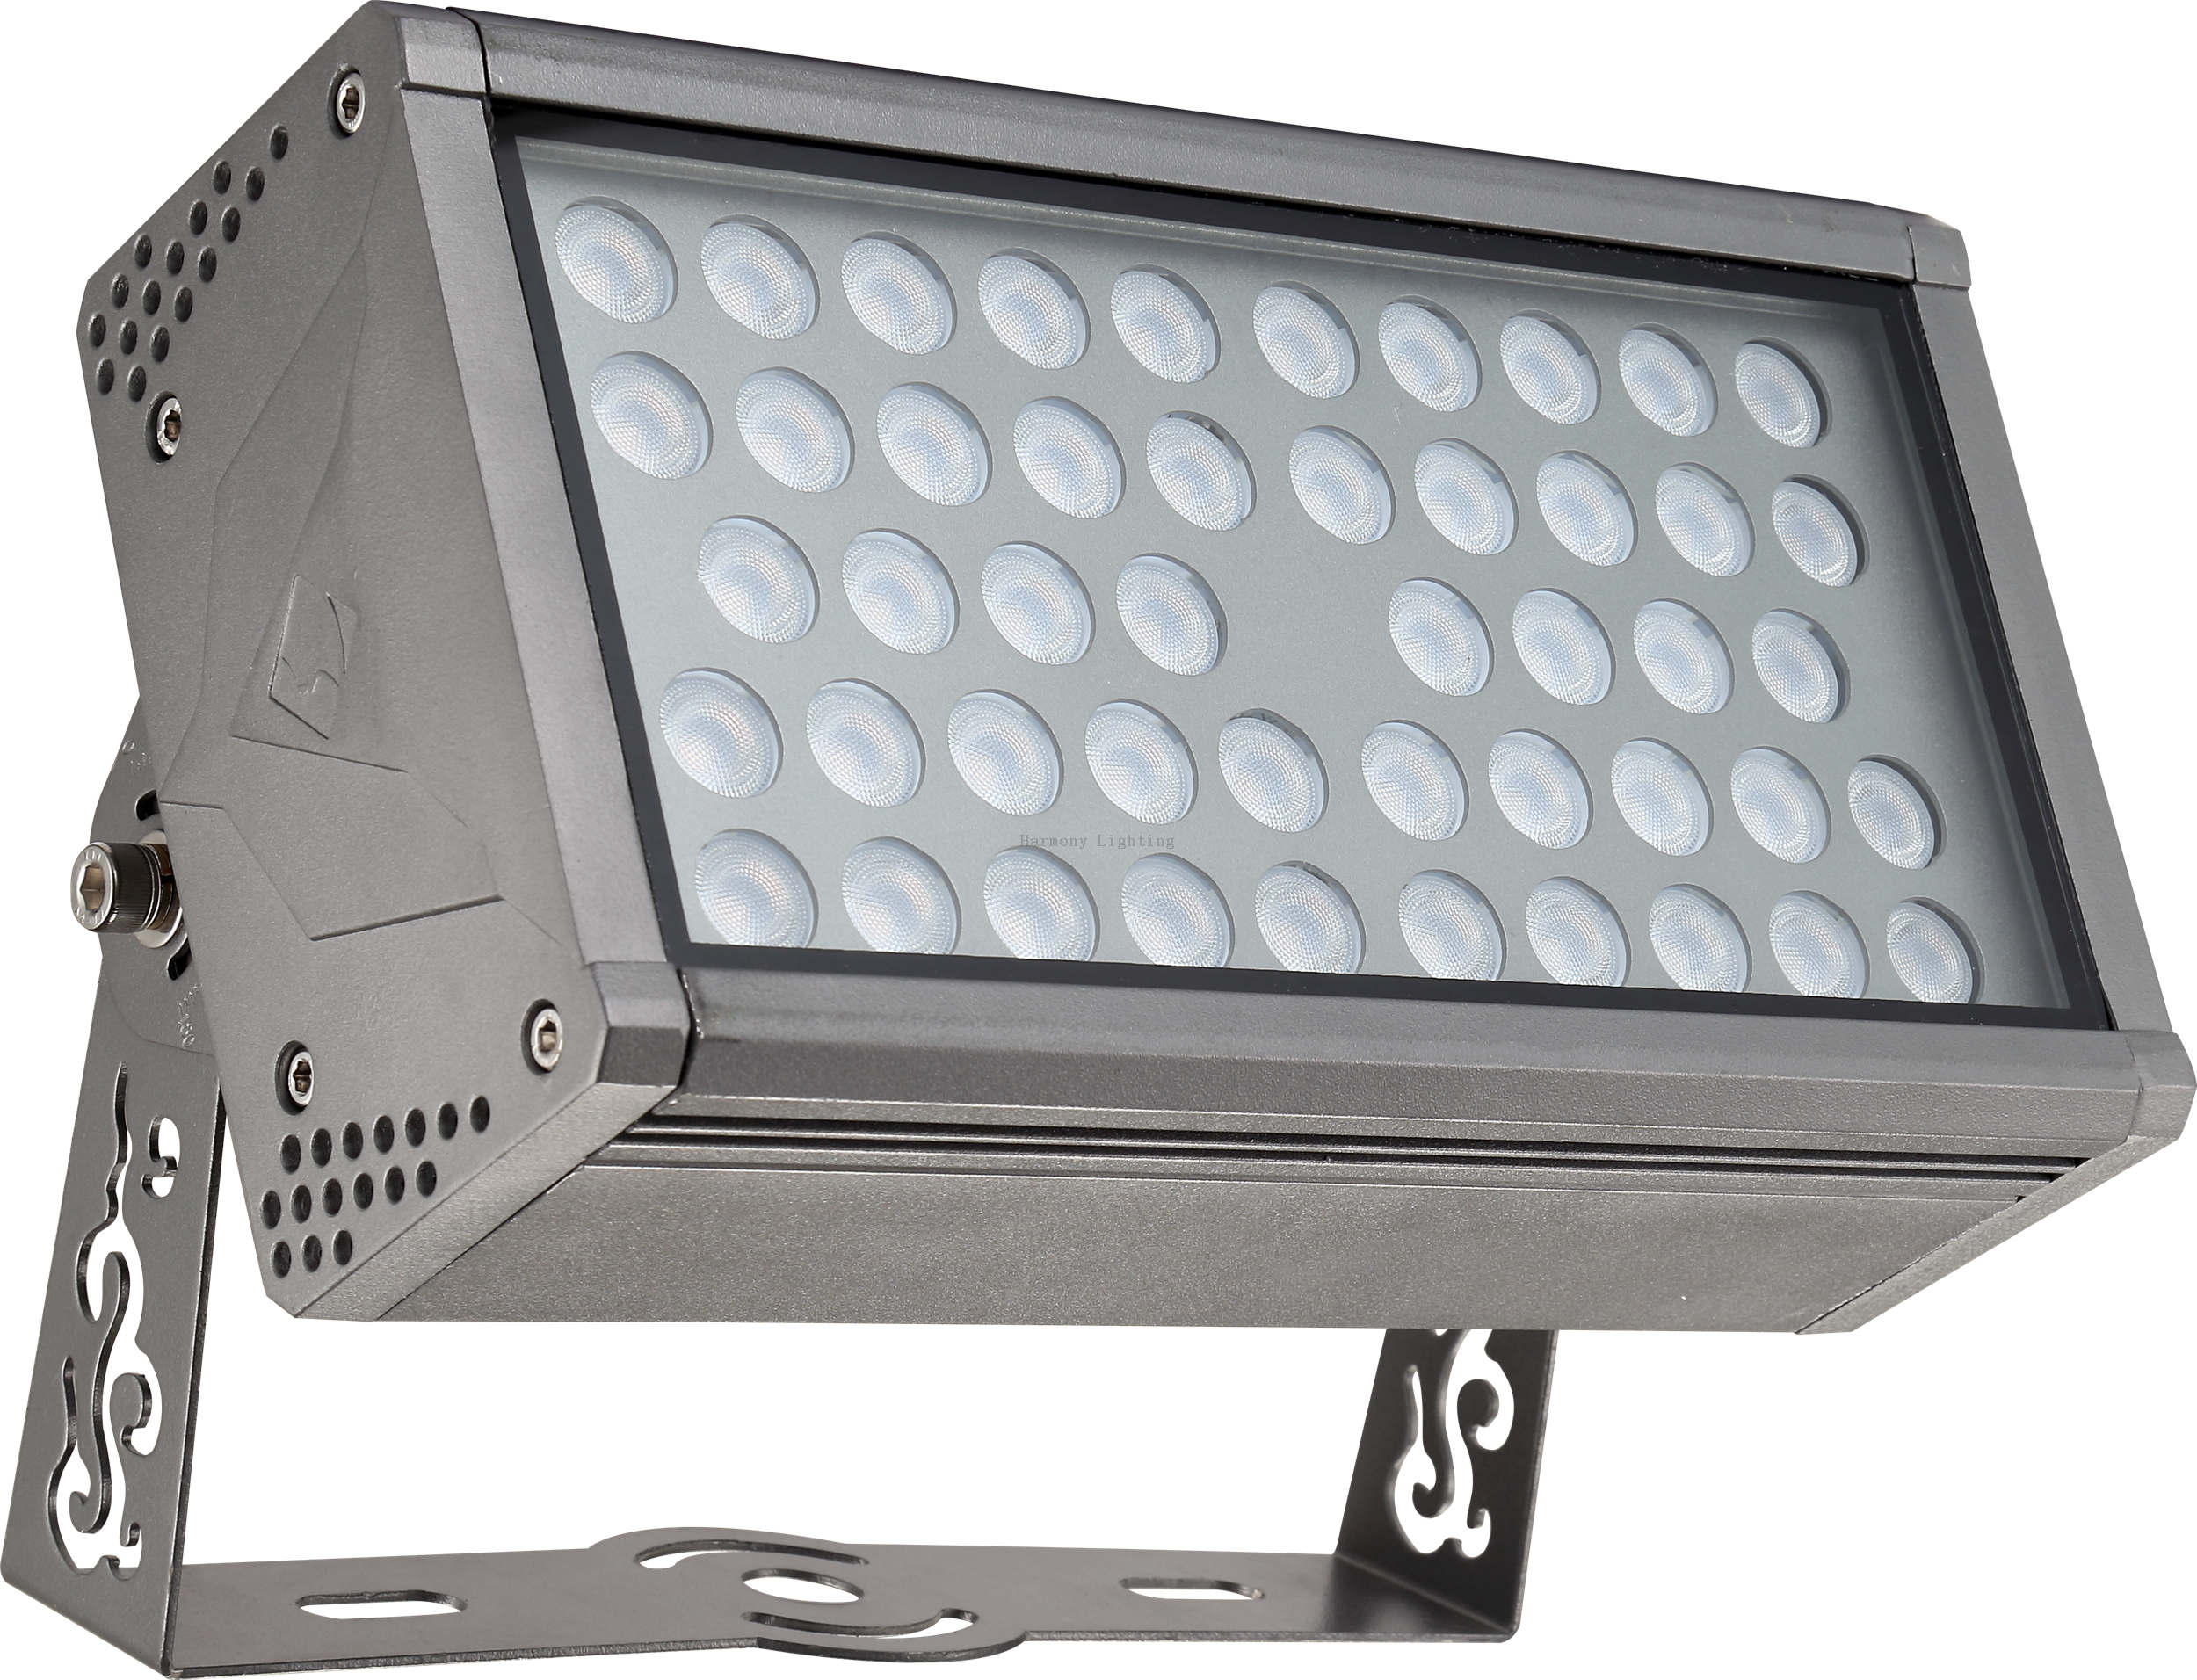 RH-P10A Architectural Floodlighting IP66 CE AC110 AC220 DC24 81W CREE LED High Brightness Waterproof Outdoor Project Flood Lamp